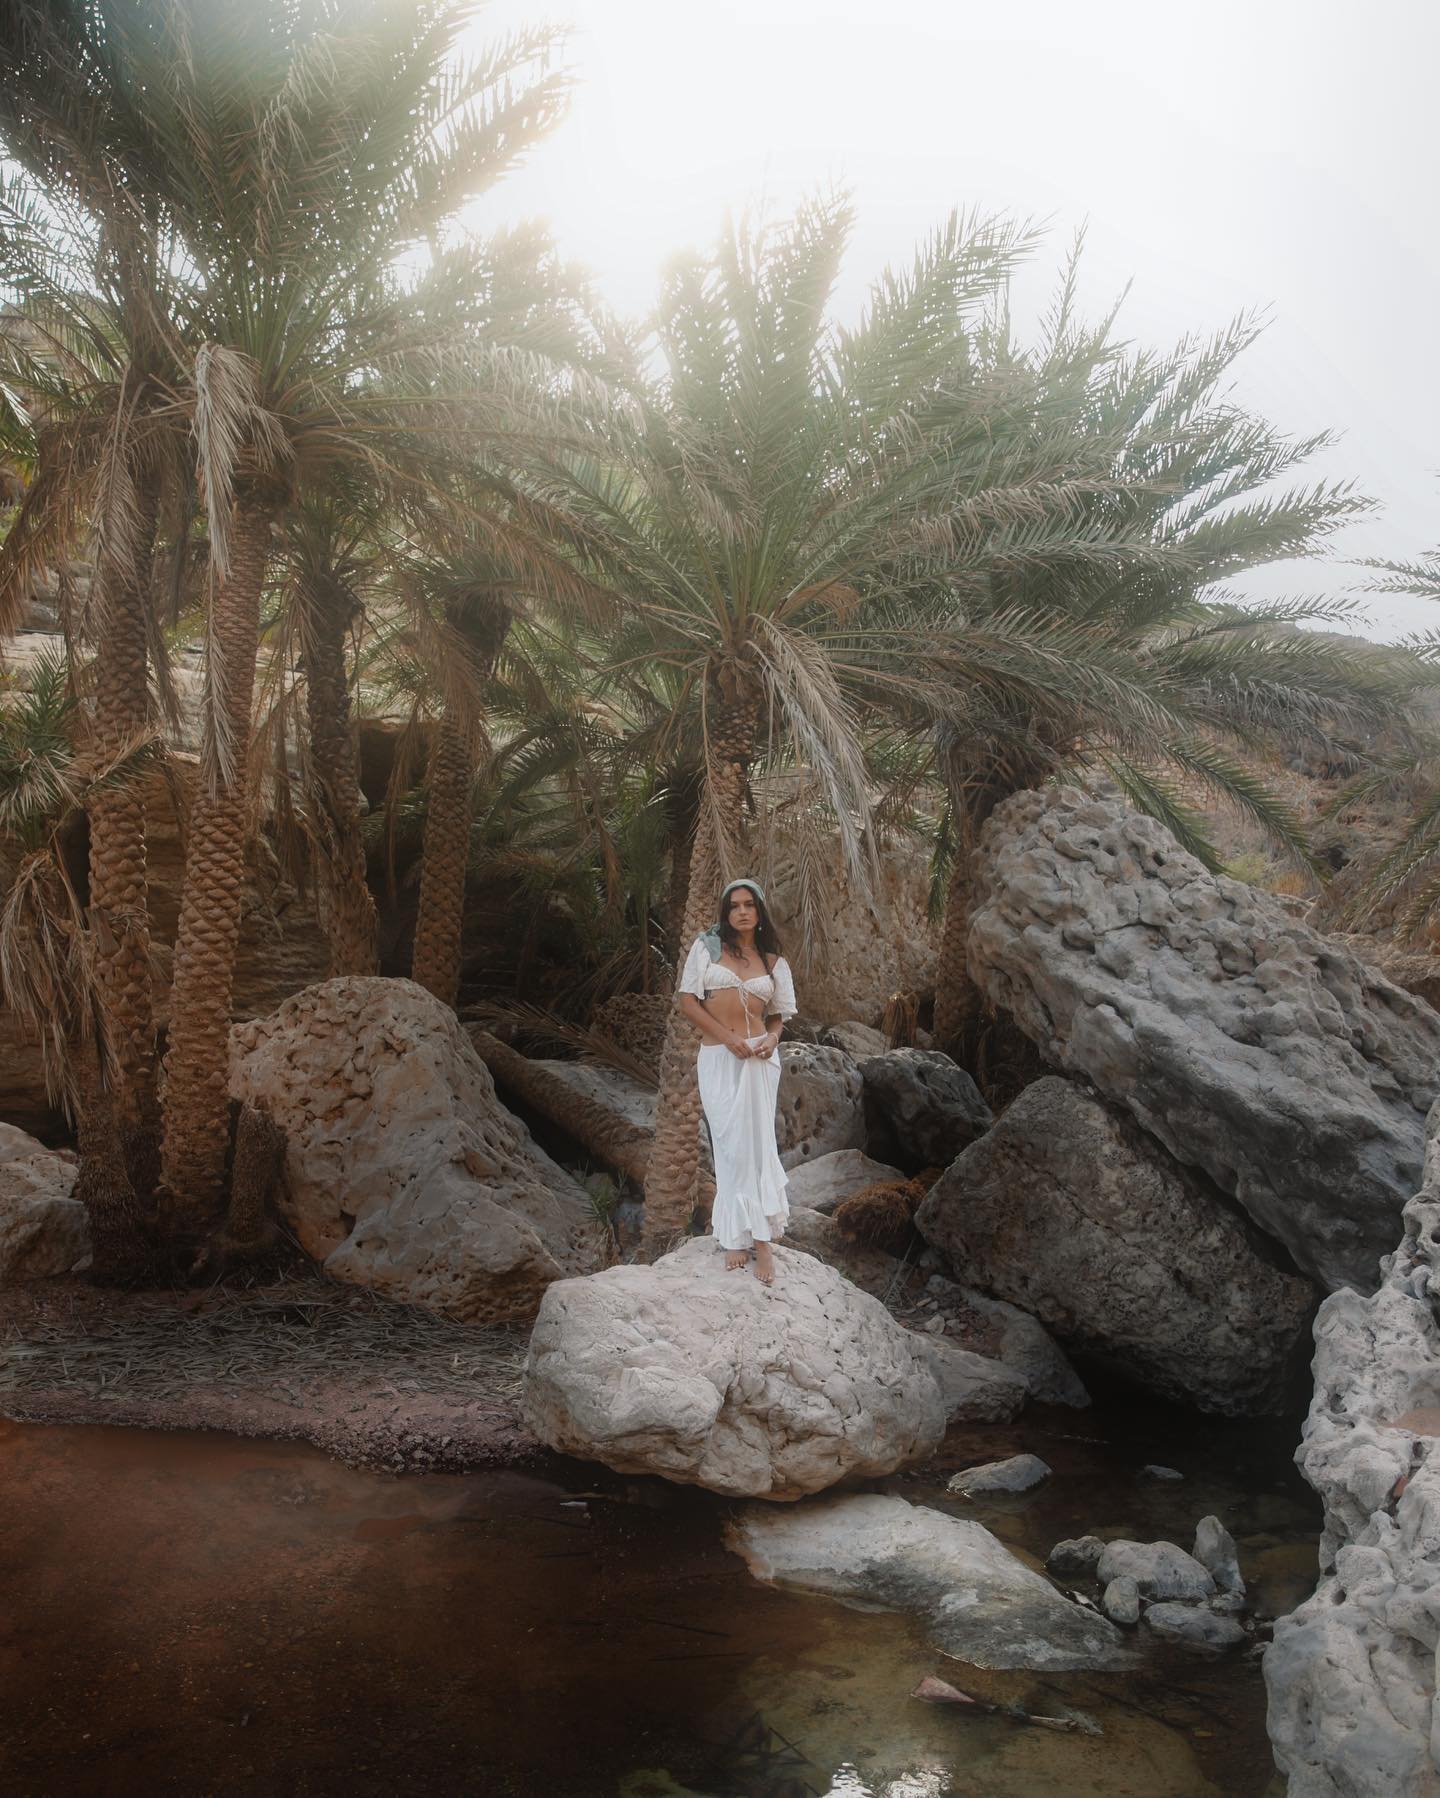 The wadis were some of my favorite stops in Socotra, despite them not really having names and often just being rest-stops in between two other, more &ldquo;exciting&rdquo; landmarks.

But I loved their obscurity, and walking through their waters felt